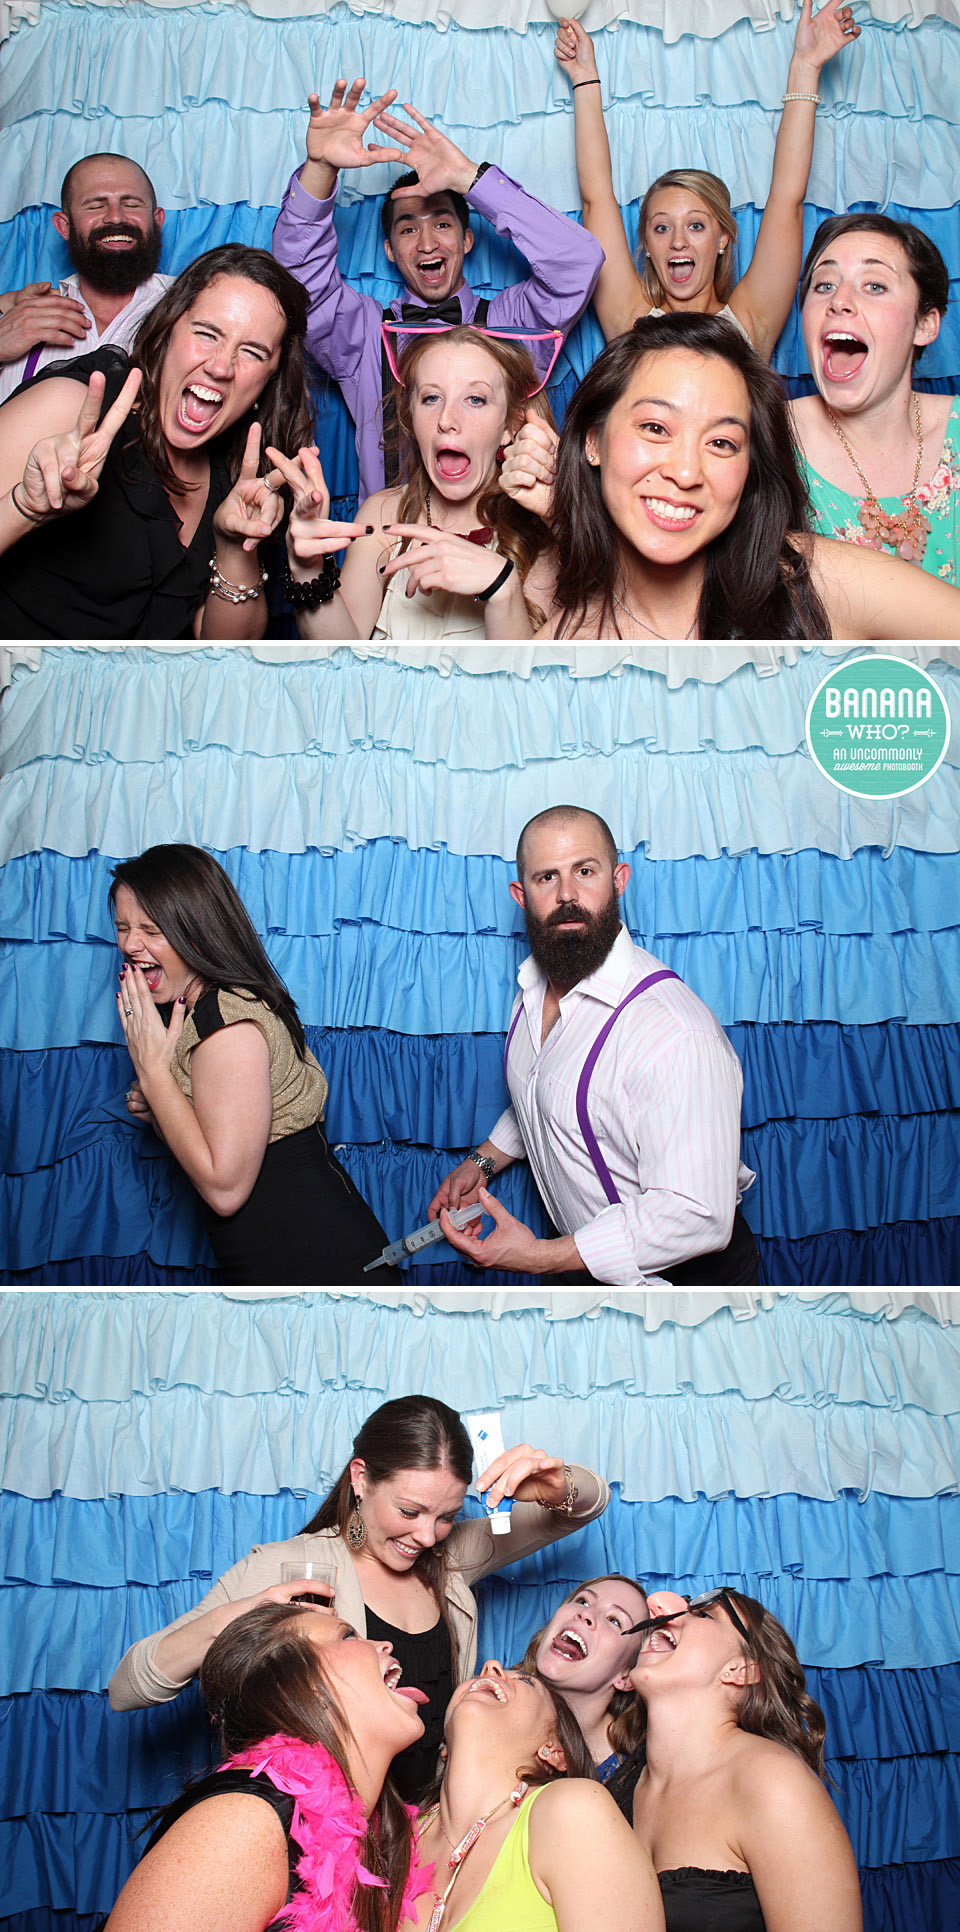 St Lukes College of Health Sciences, Nurses, Banana Who? Booth, Kansas City photo booths